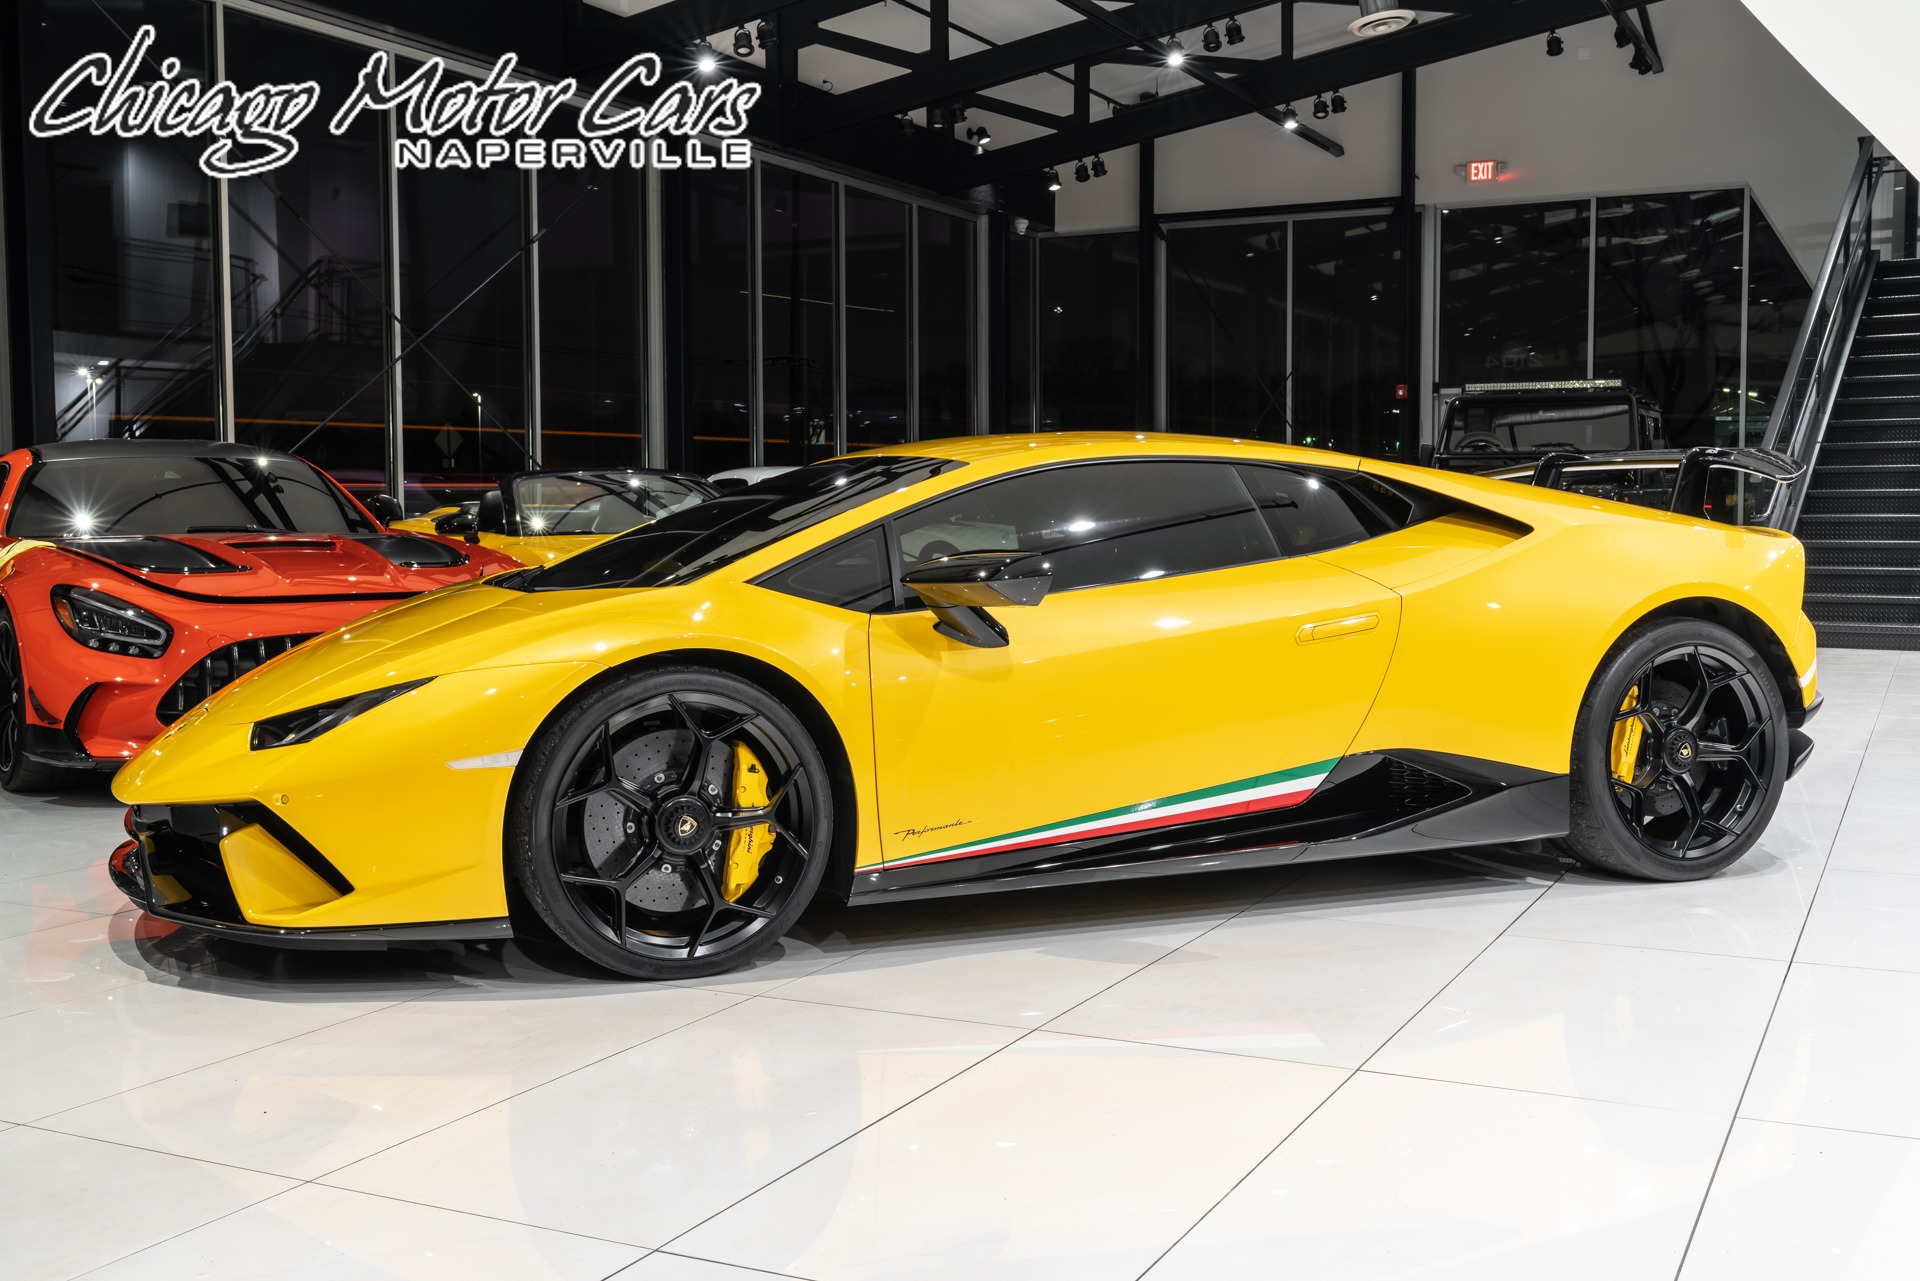 Used 2018 Lamborghini Huracan LP640-4 Performante Coupe FORGED CARBON! Full  Car PPF! Upgraded Exhaust! For Sale ($329,800) | Karma Naperville Stock  #20078